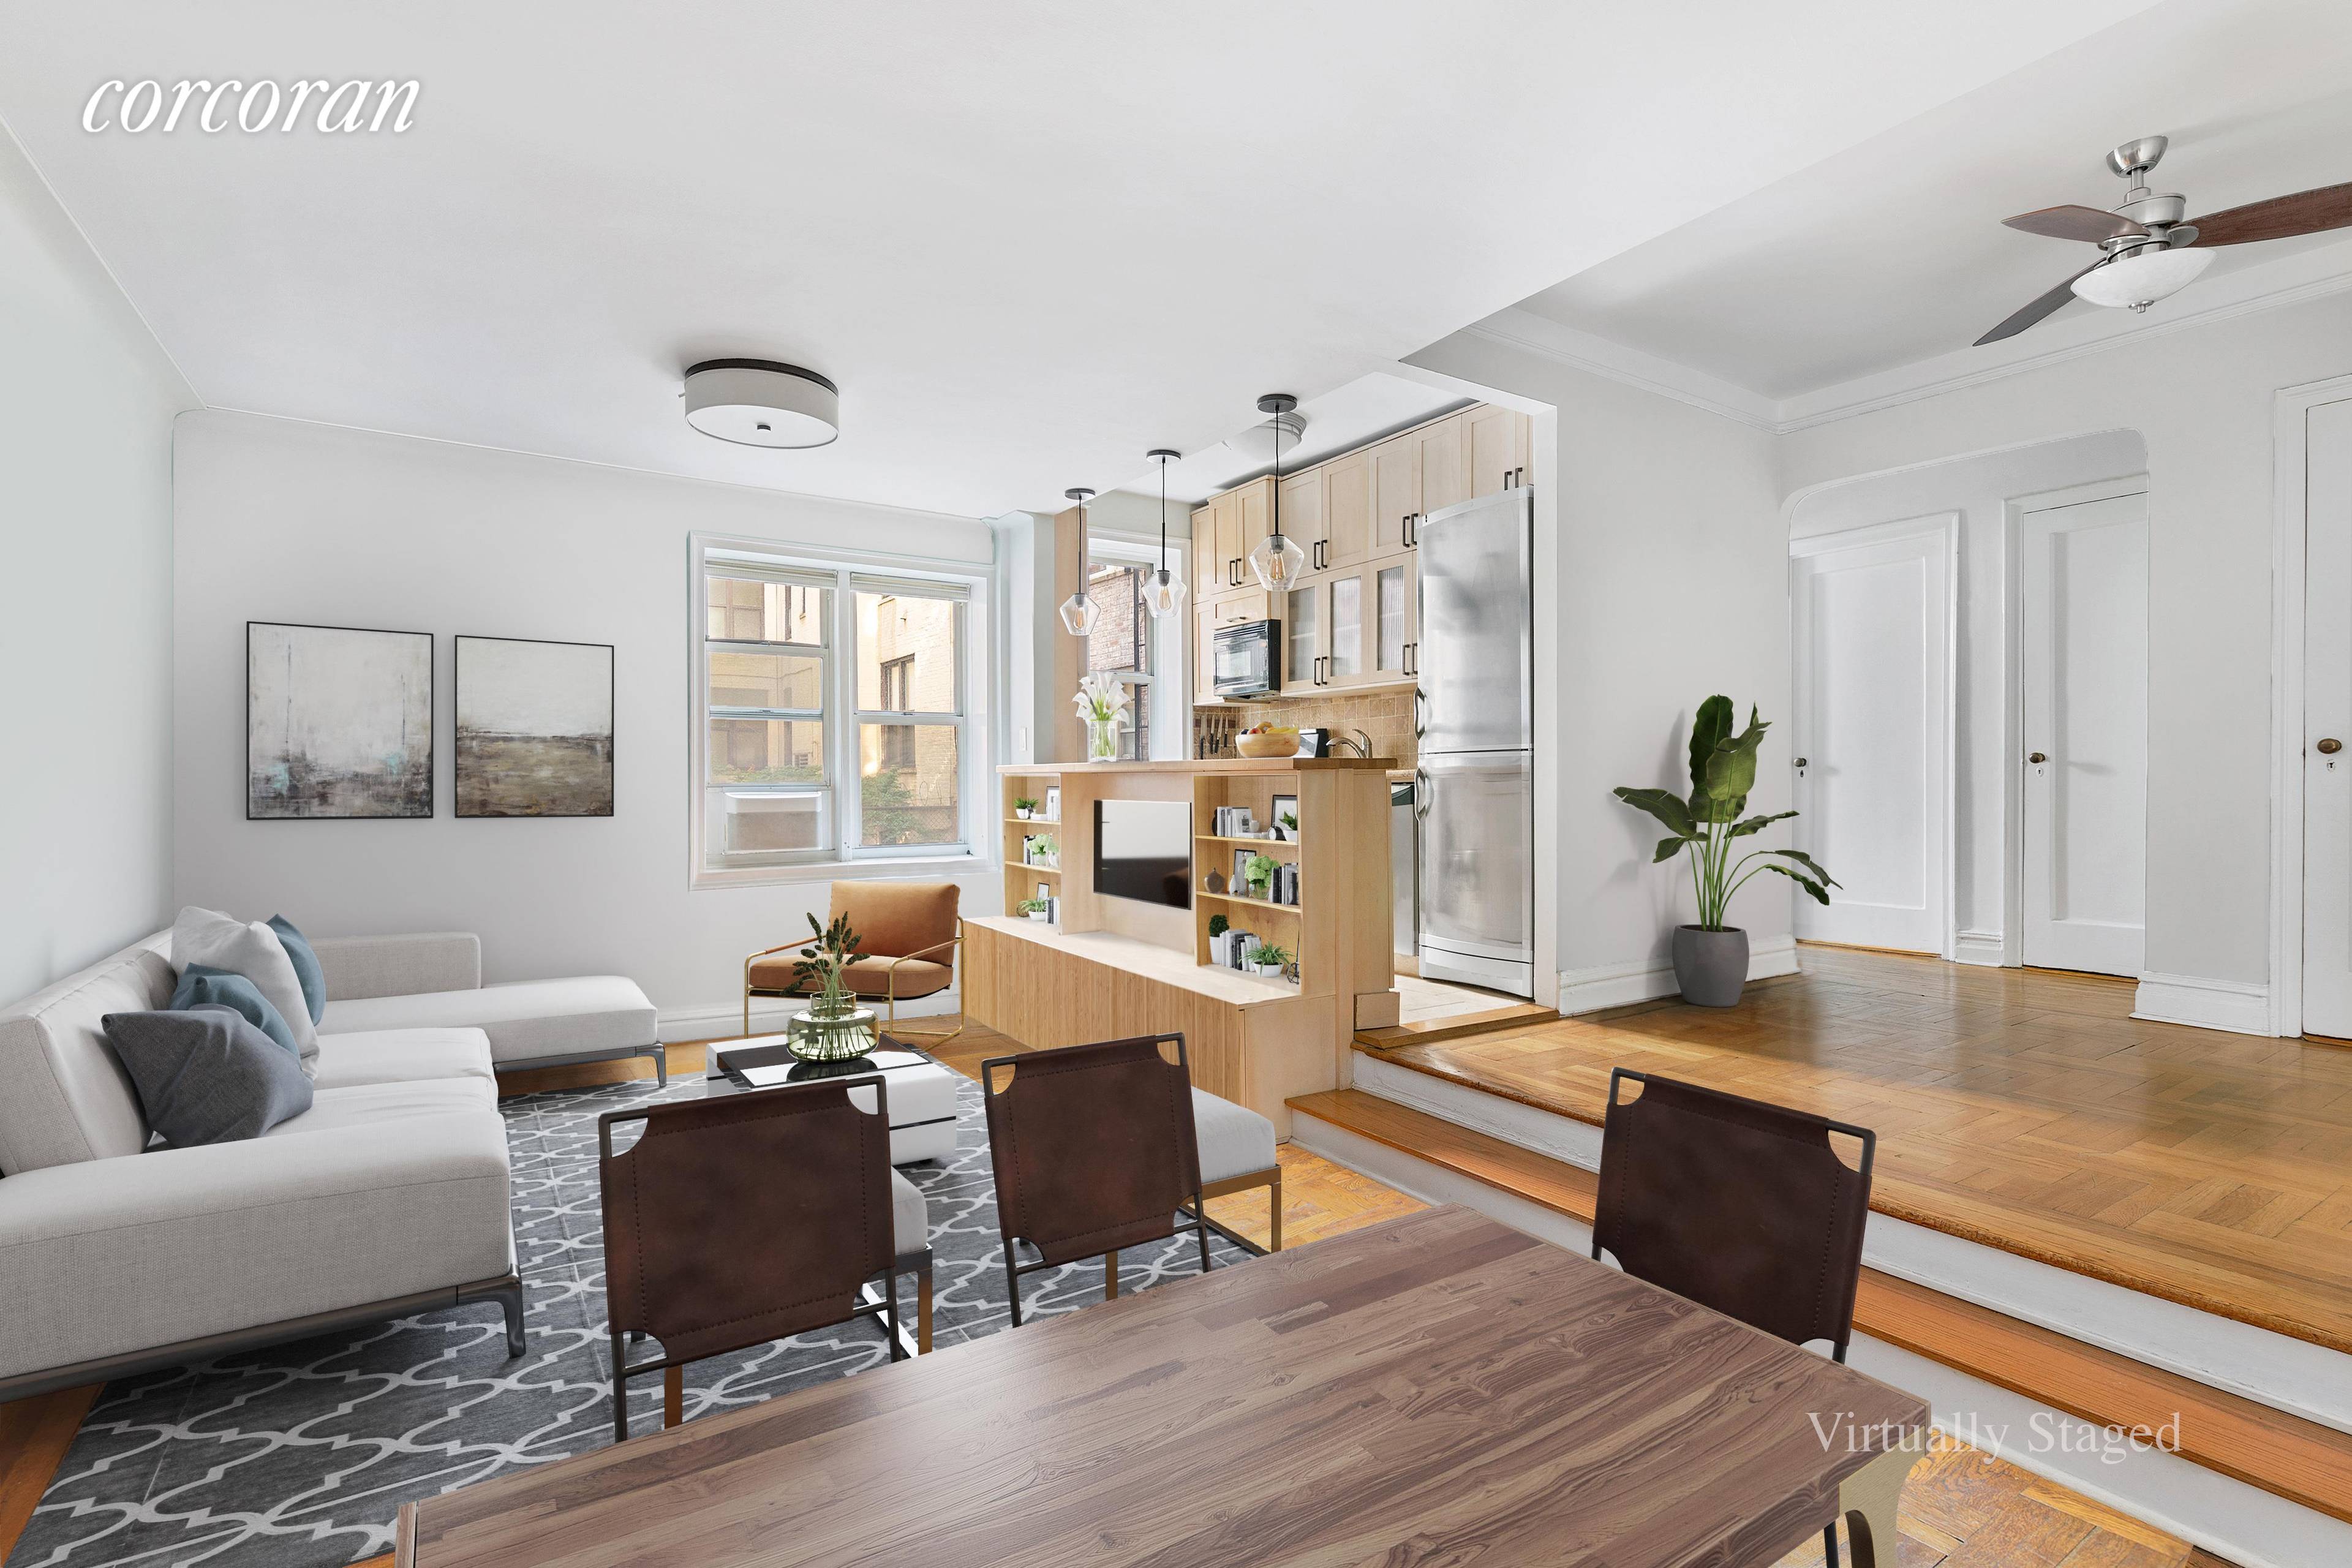 Welcome to 55 Eastern Parkway, a charming pre war building located across the street from Prospect Park !